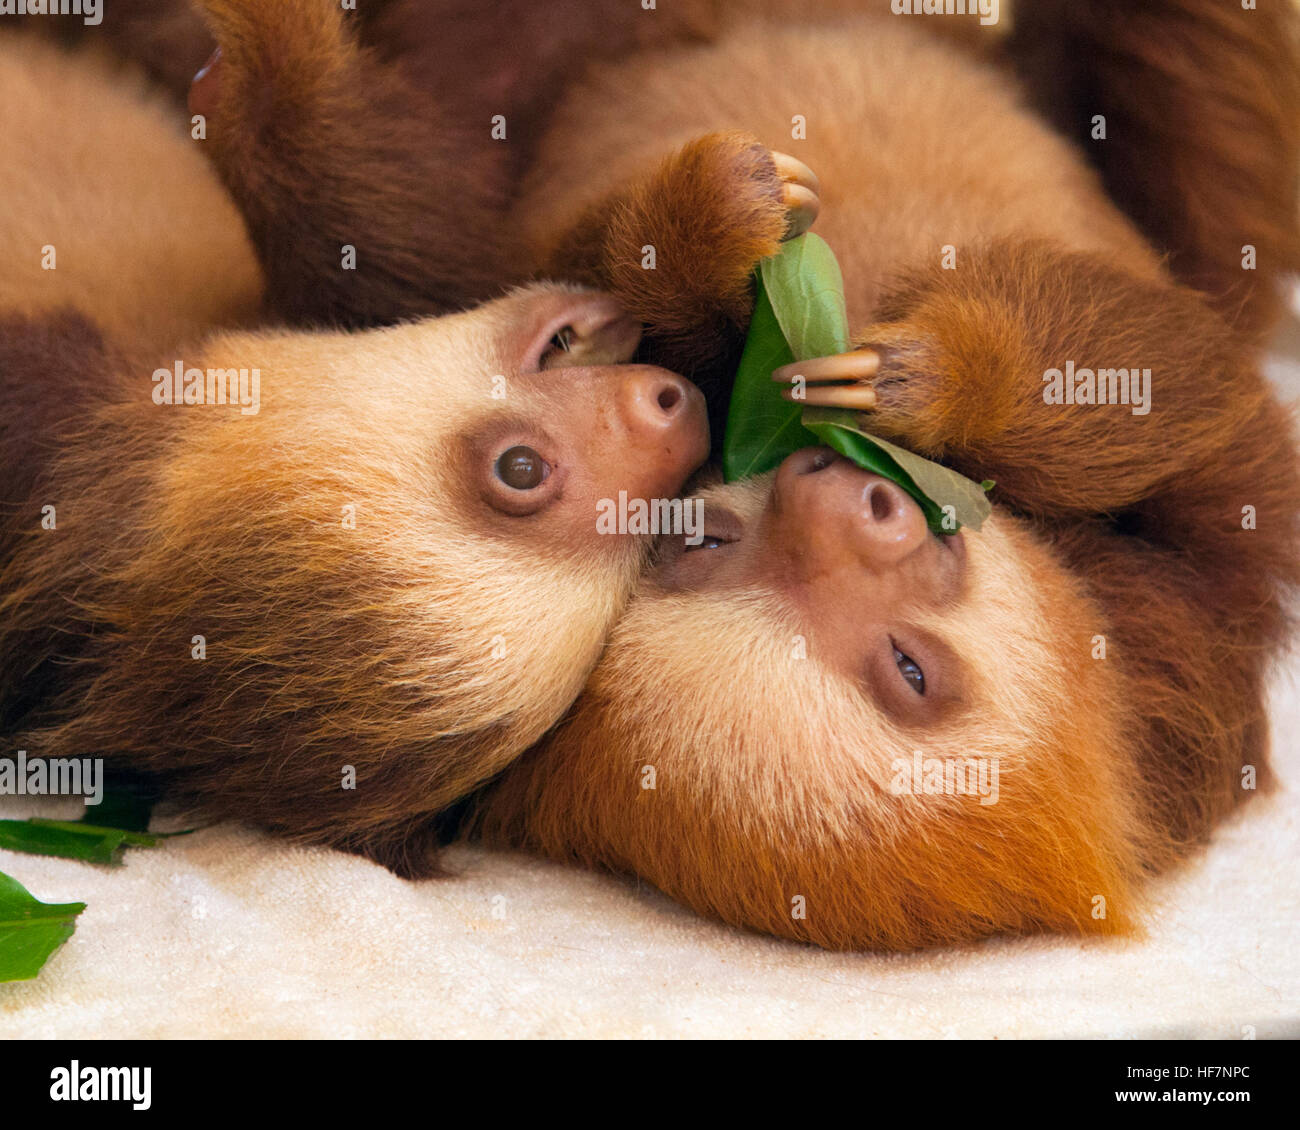 Baby orphaned Hoffmann's Two-toed Sloths (Choloepus hoffmanni) feeding on leaves at the Sloth Sanctuary in Costa Rica Stock Photo